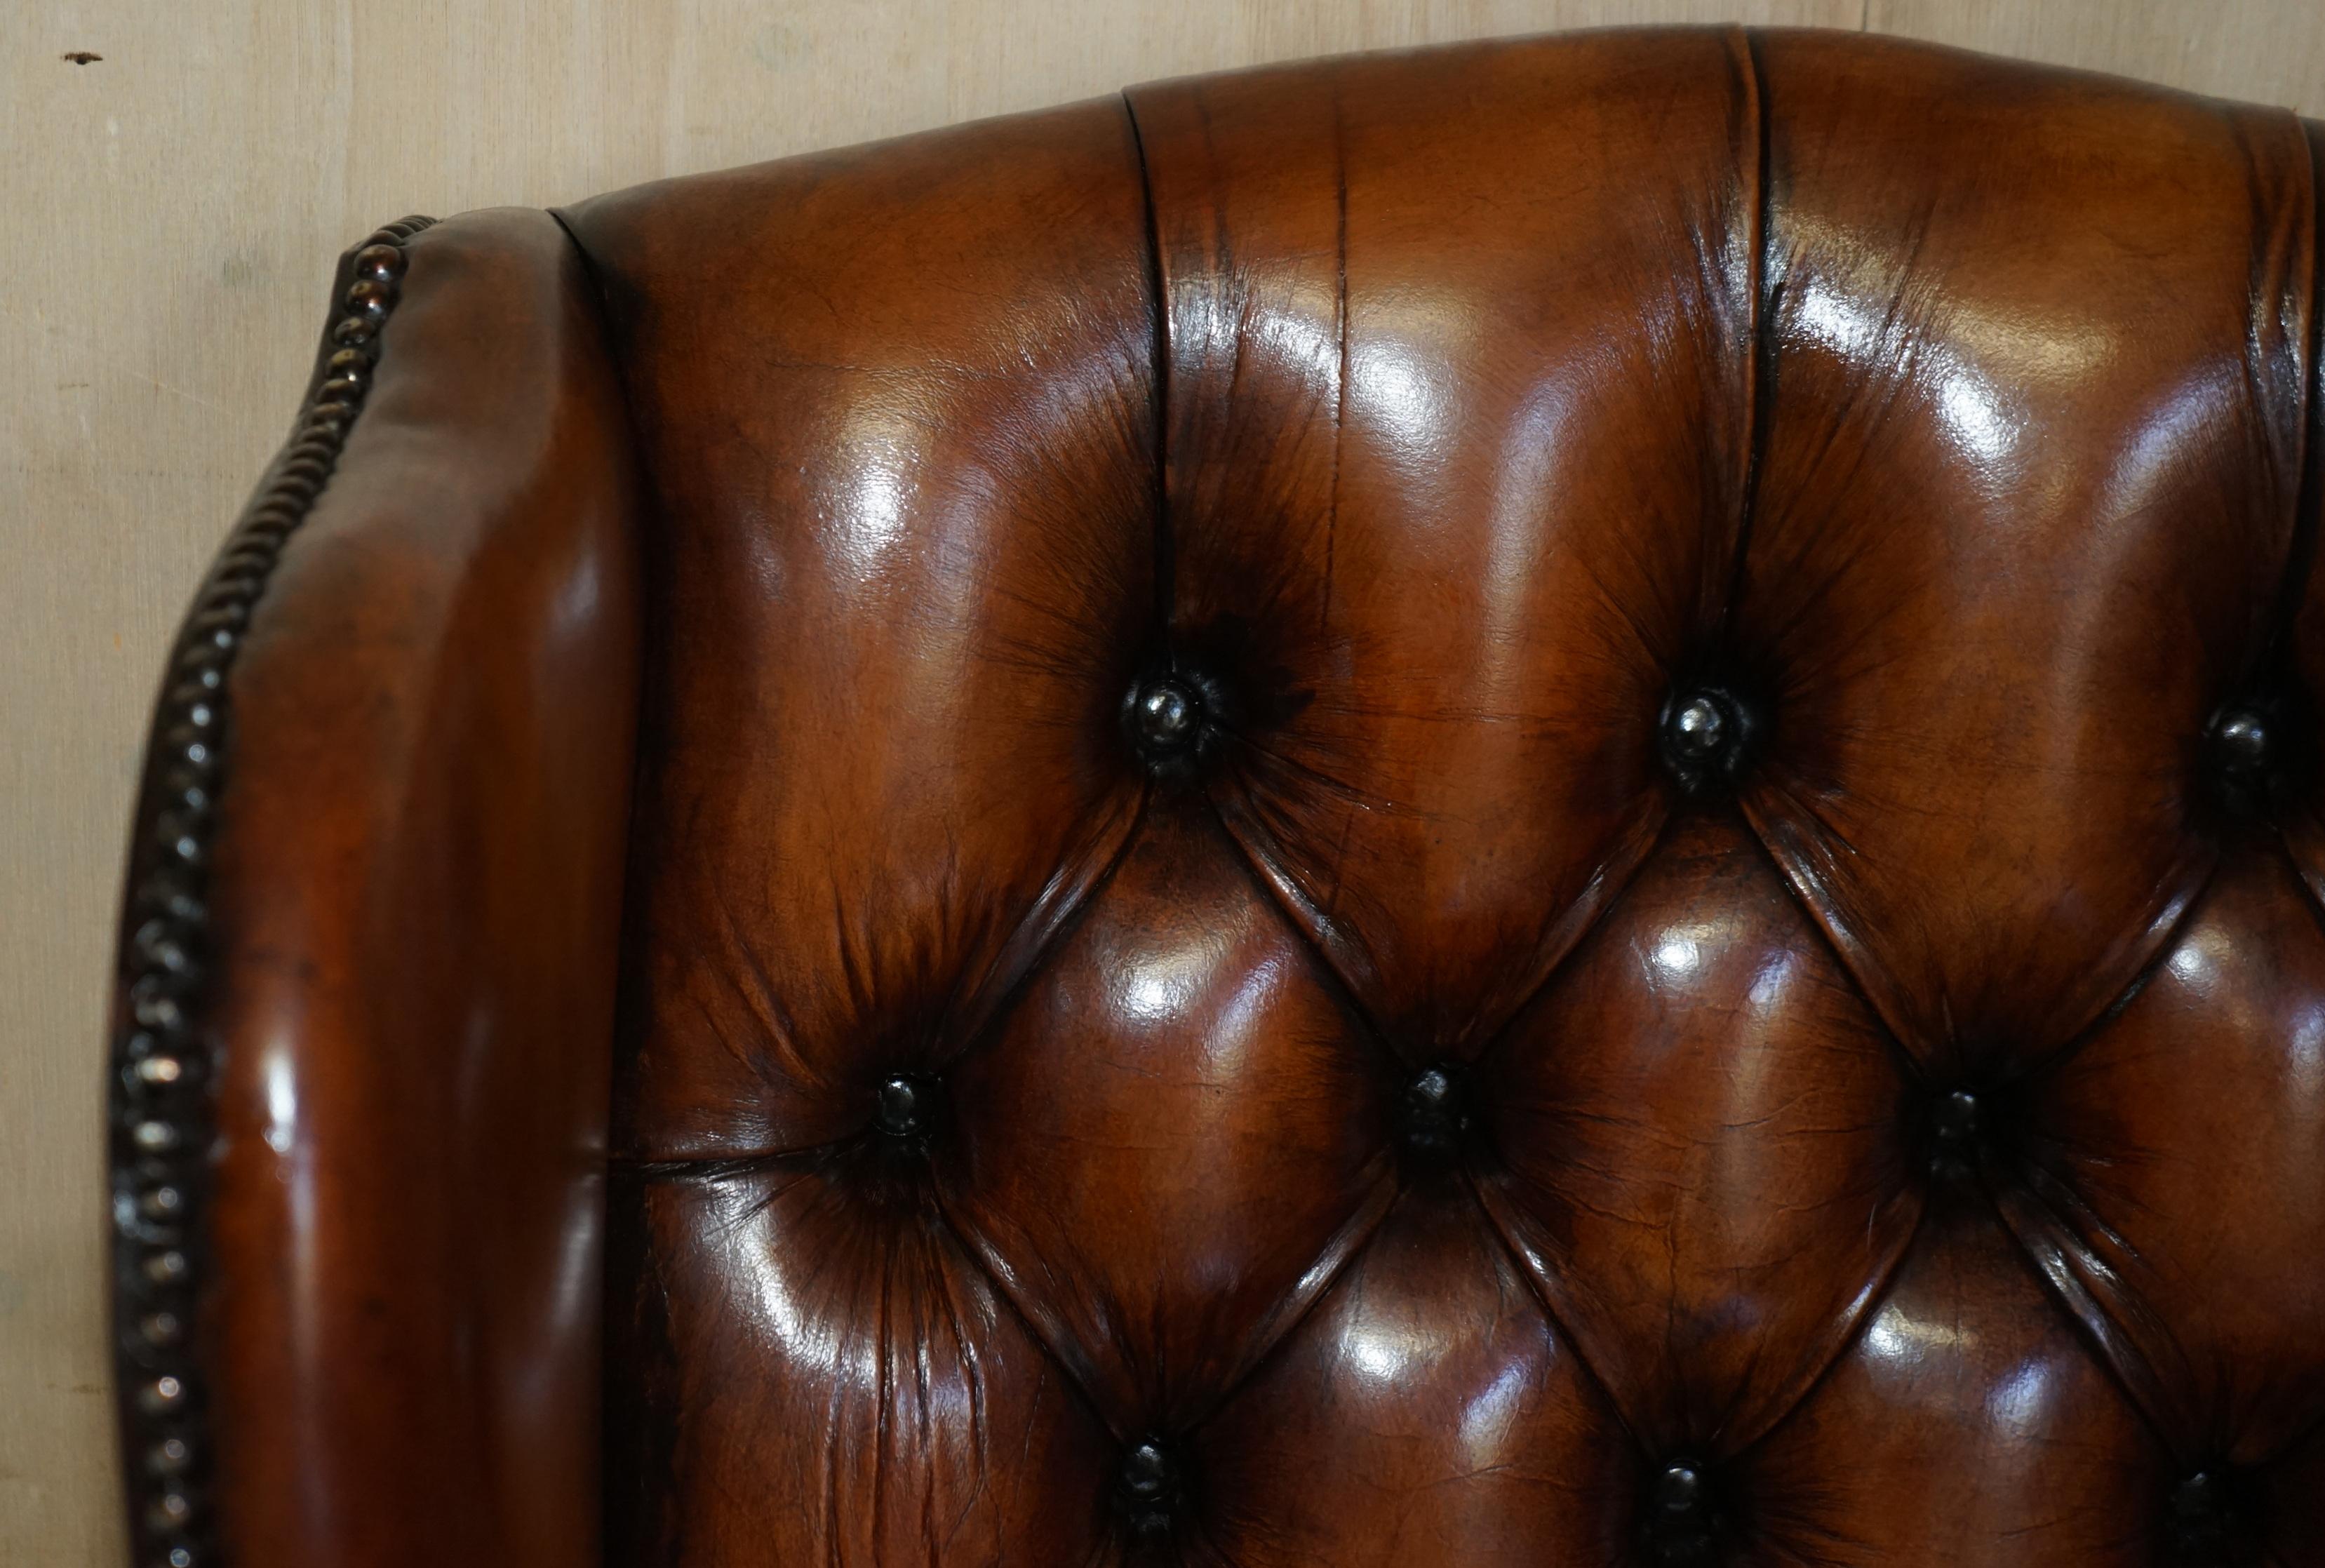 English PAIR OF ANTIQUE WILLIAM MORRIS WiNGBACK ARMCHAIRS HAND DYED CIGAR BROWN LEATHER For Sale